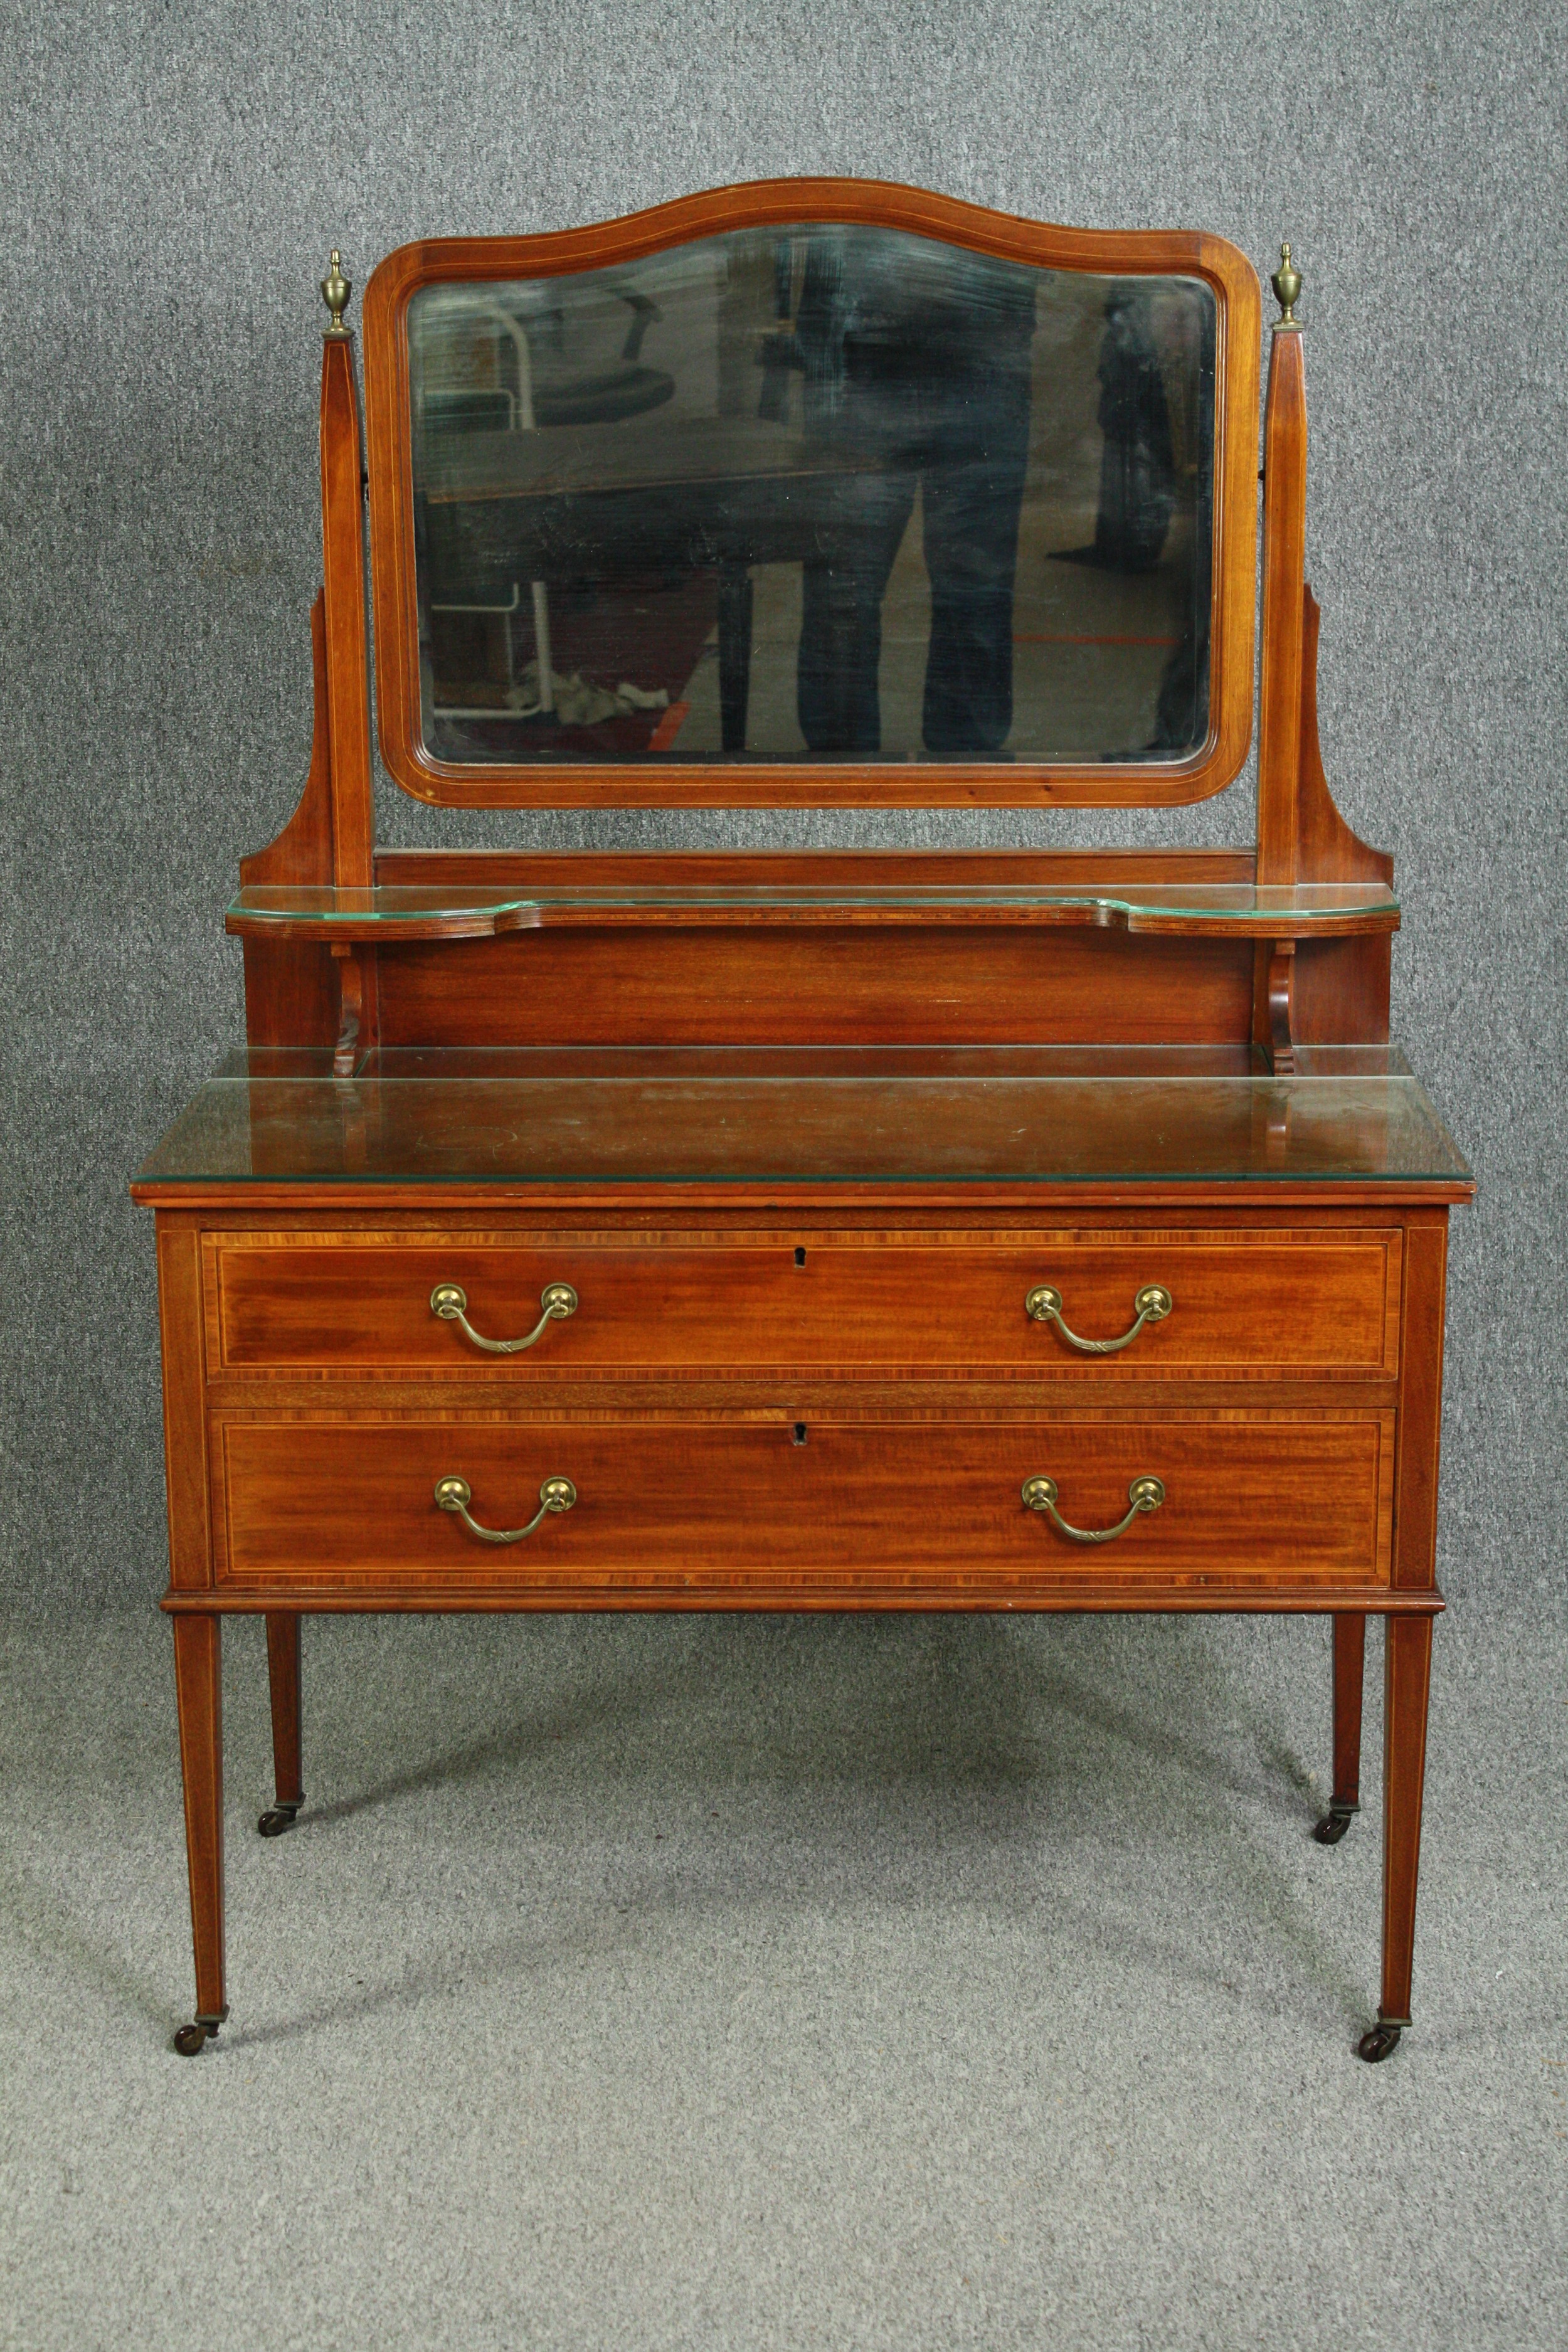 Dressing table, Edwardian mahogany and satinwood inlaid with plate glass protective top. H.154 W.104